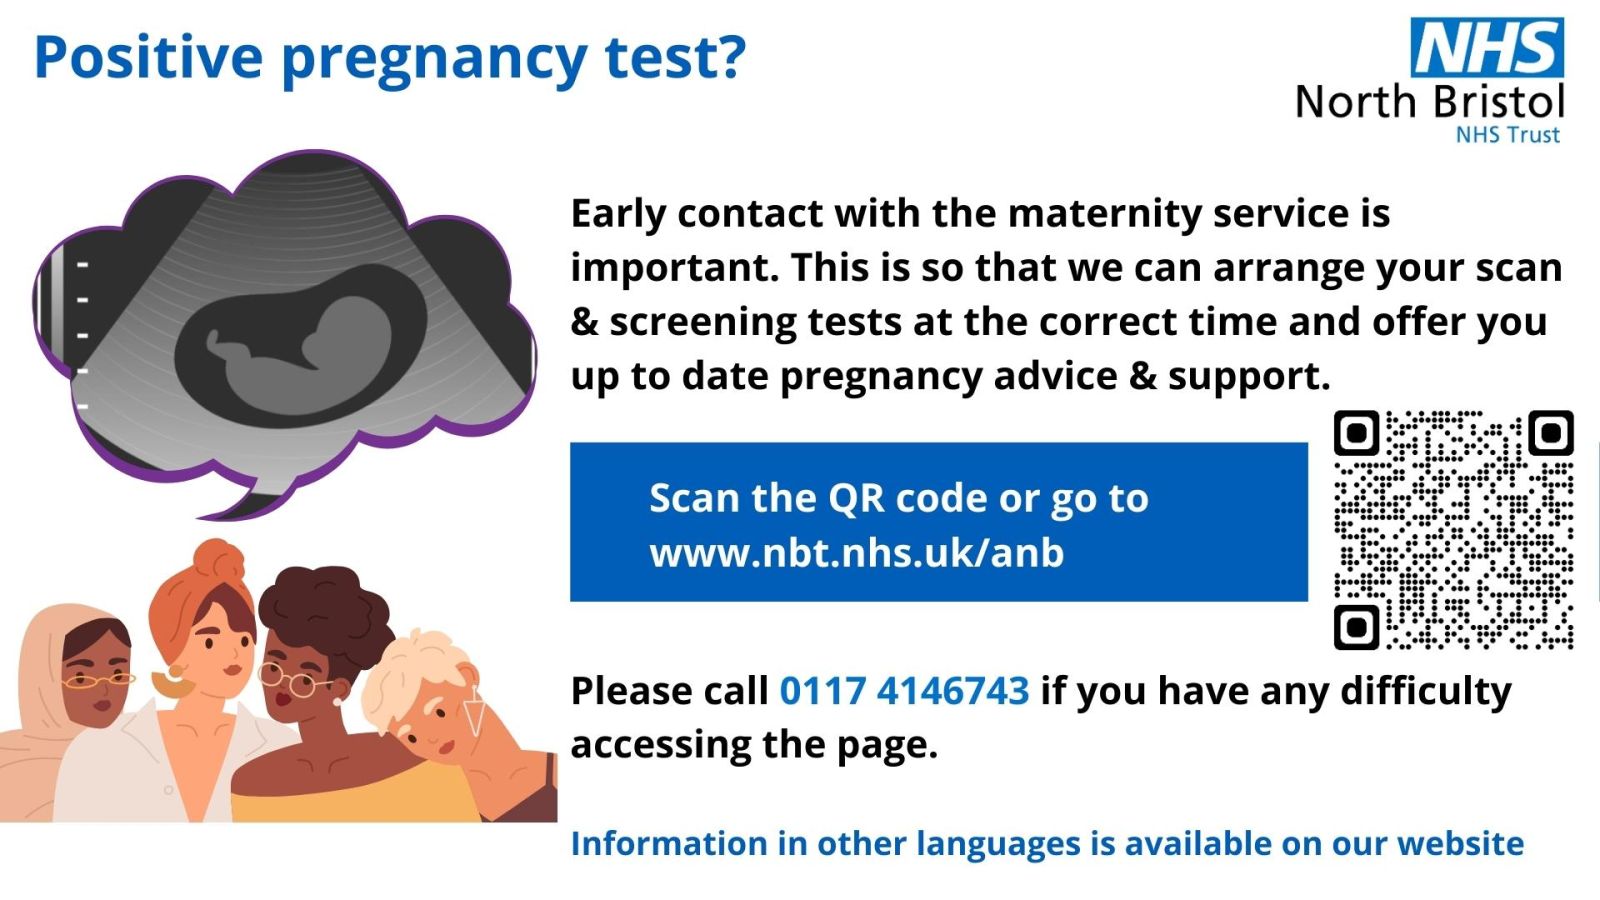 Positive pregnancy test? Early contact with the maternity service is important. This is so that we can arrange your scan and screening tests at the correct time and offer you up to date pregnancy advice and support. Go to https://www.nbt.nhs.uk/maternity-services/pregnancy/antenatal-booking-self-refer-your-pregnancy. Please call 01174146946 if you have any difficulty accessing the page.